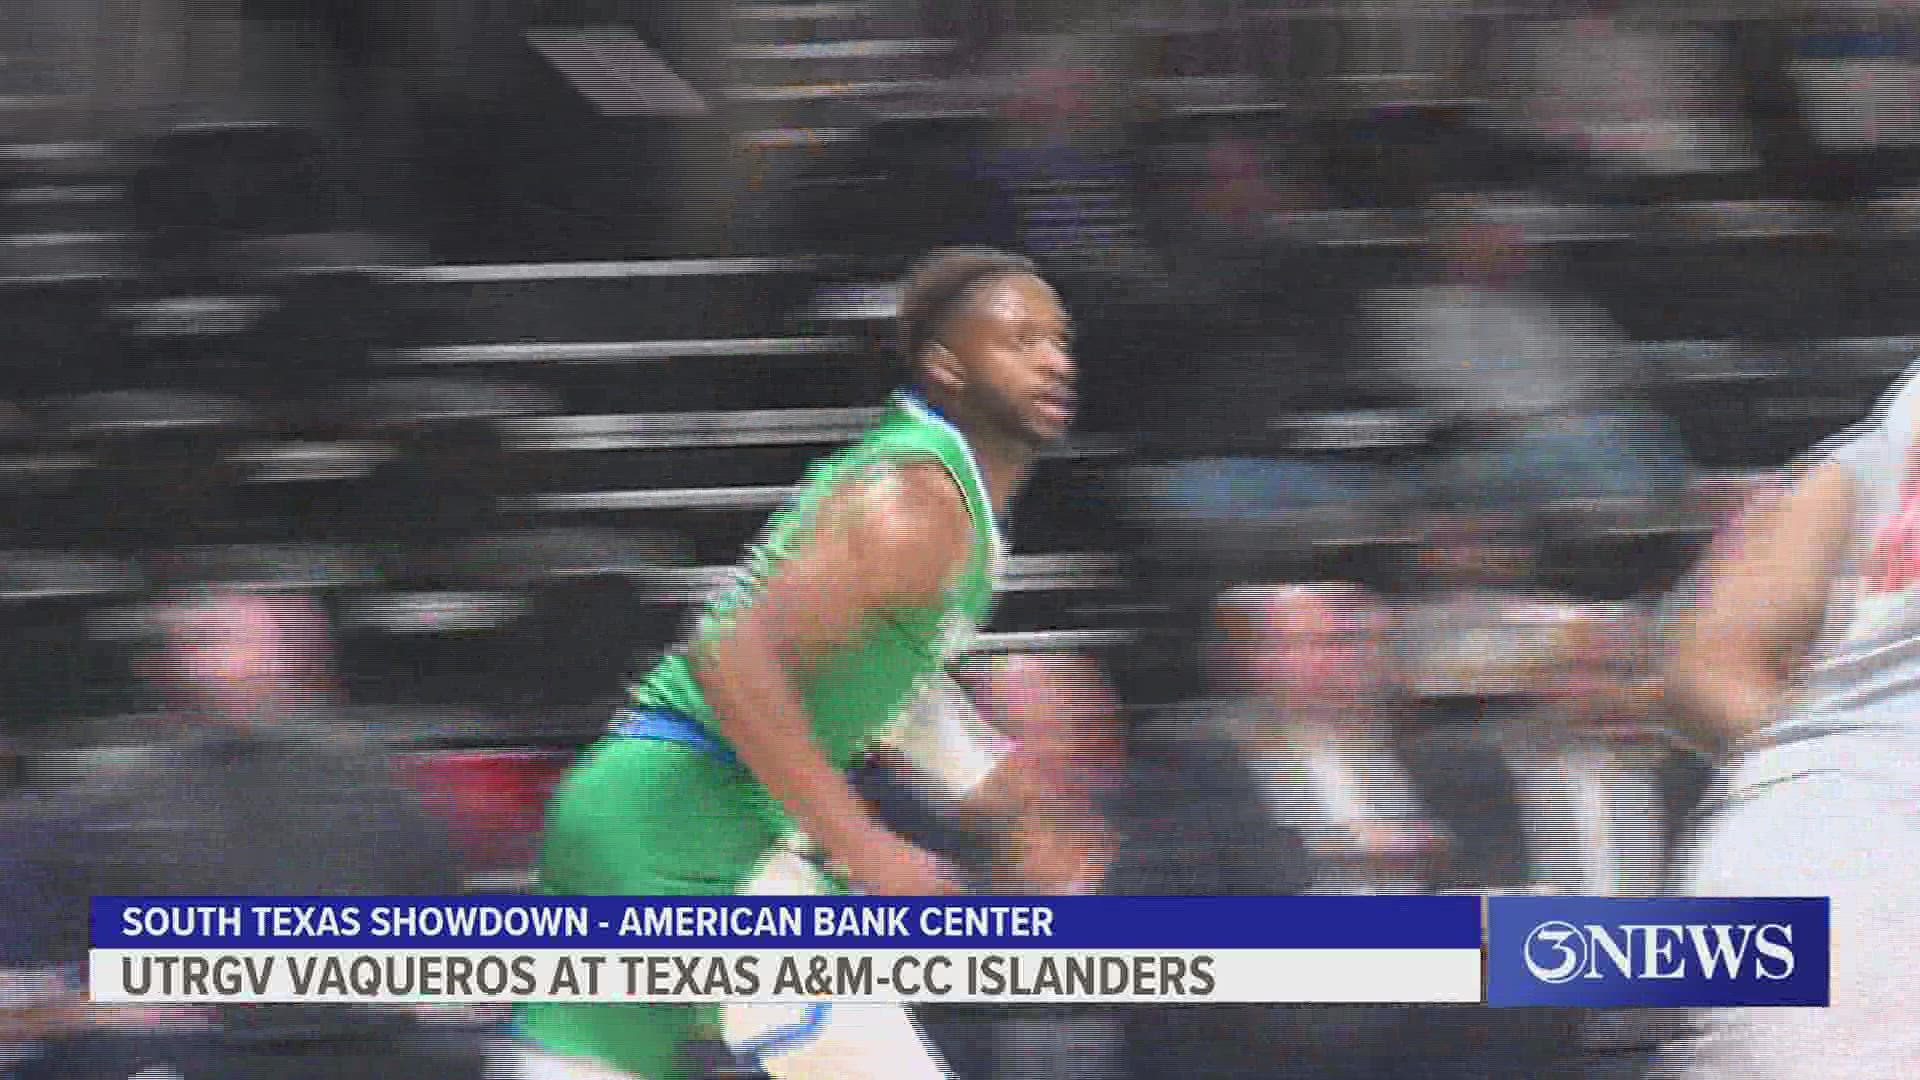 Texas A&M-CC lead from the jump Thursday in a 97-75 win over the Vaqueros.